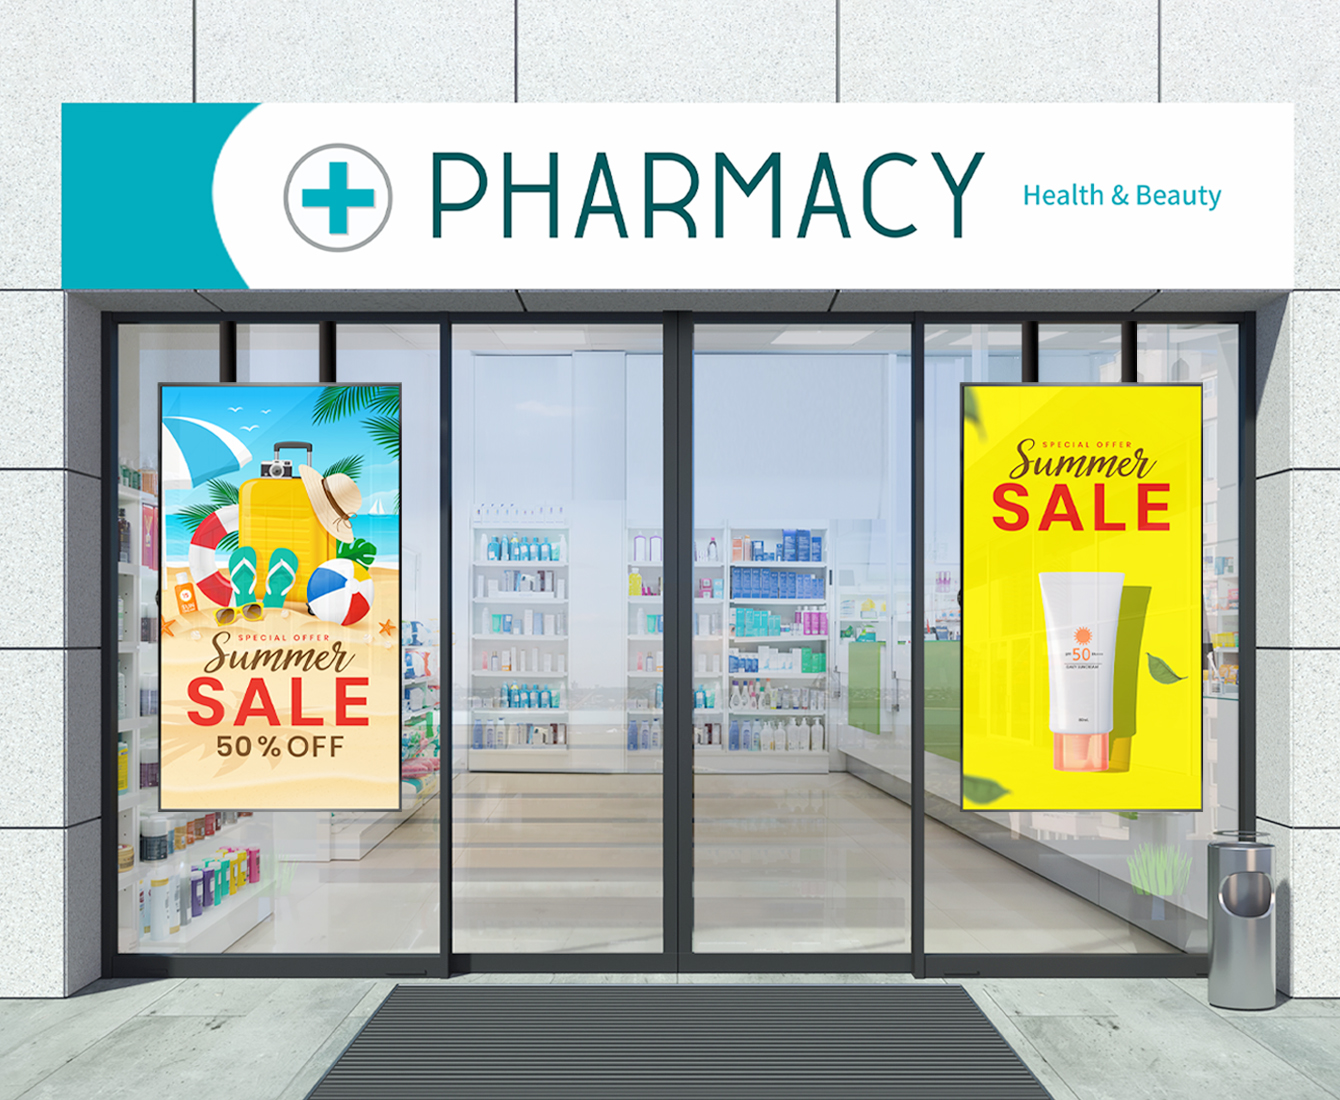 Inside the pharmacy, there are two large displays installed —one on the left side of the store window and the other on the right—showcasing clear advertising content.